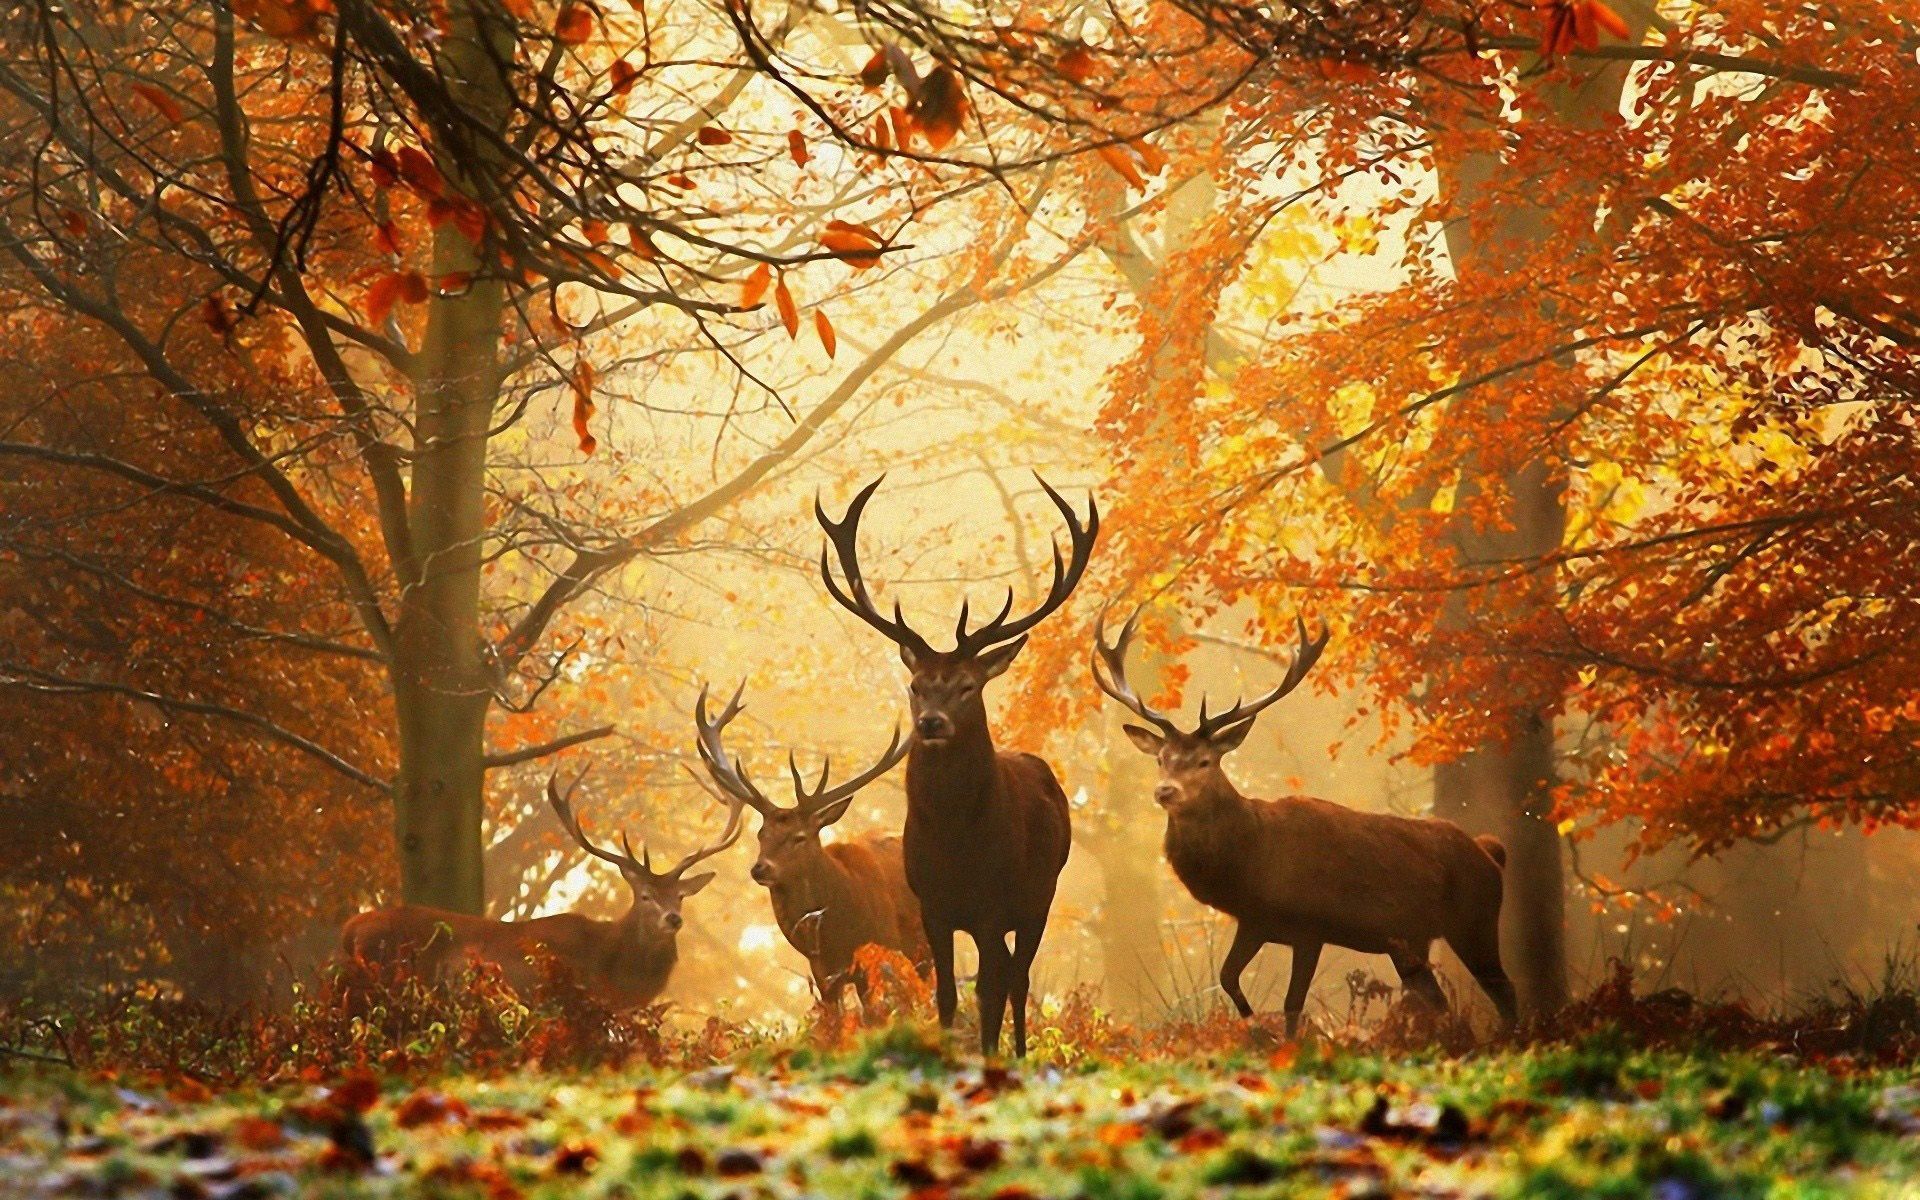 Deer in the woods wallpapers and images - wallpapers, pictures, photos